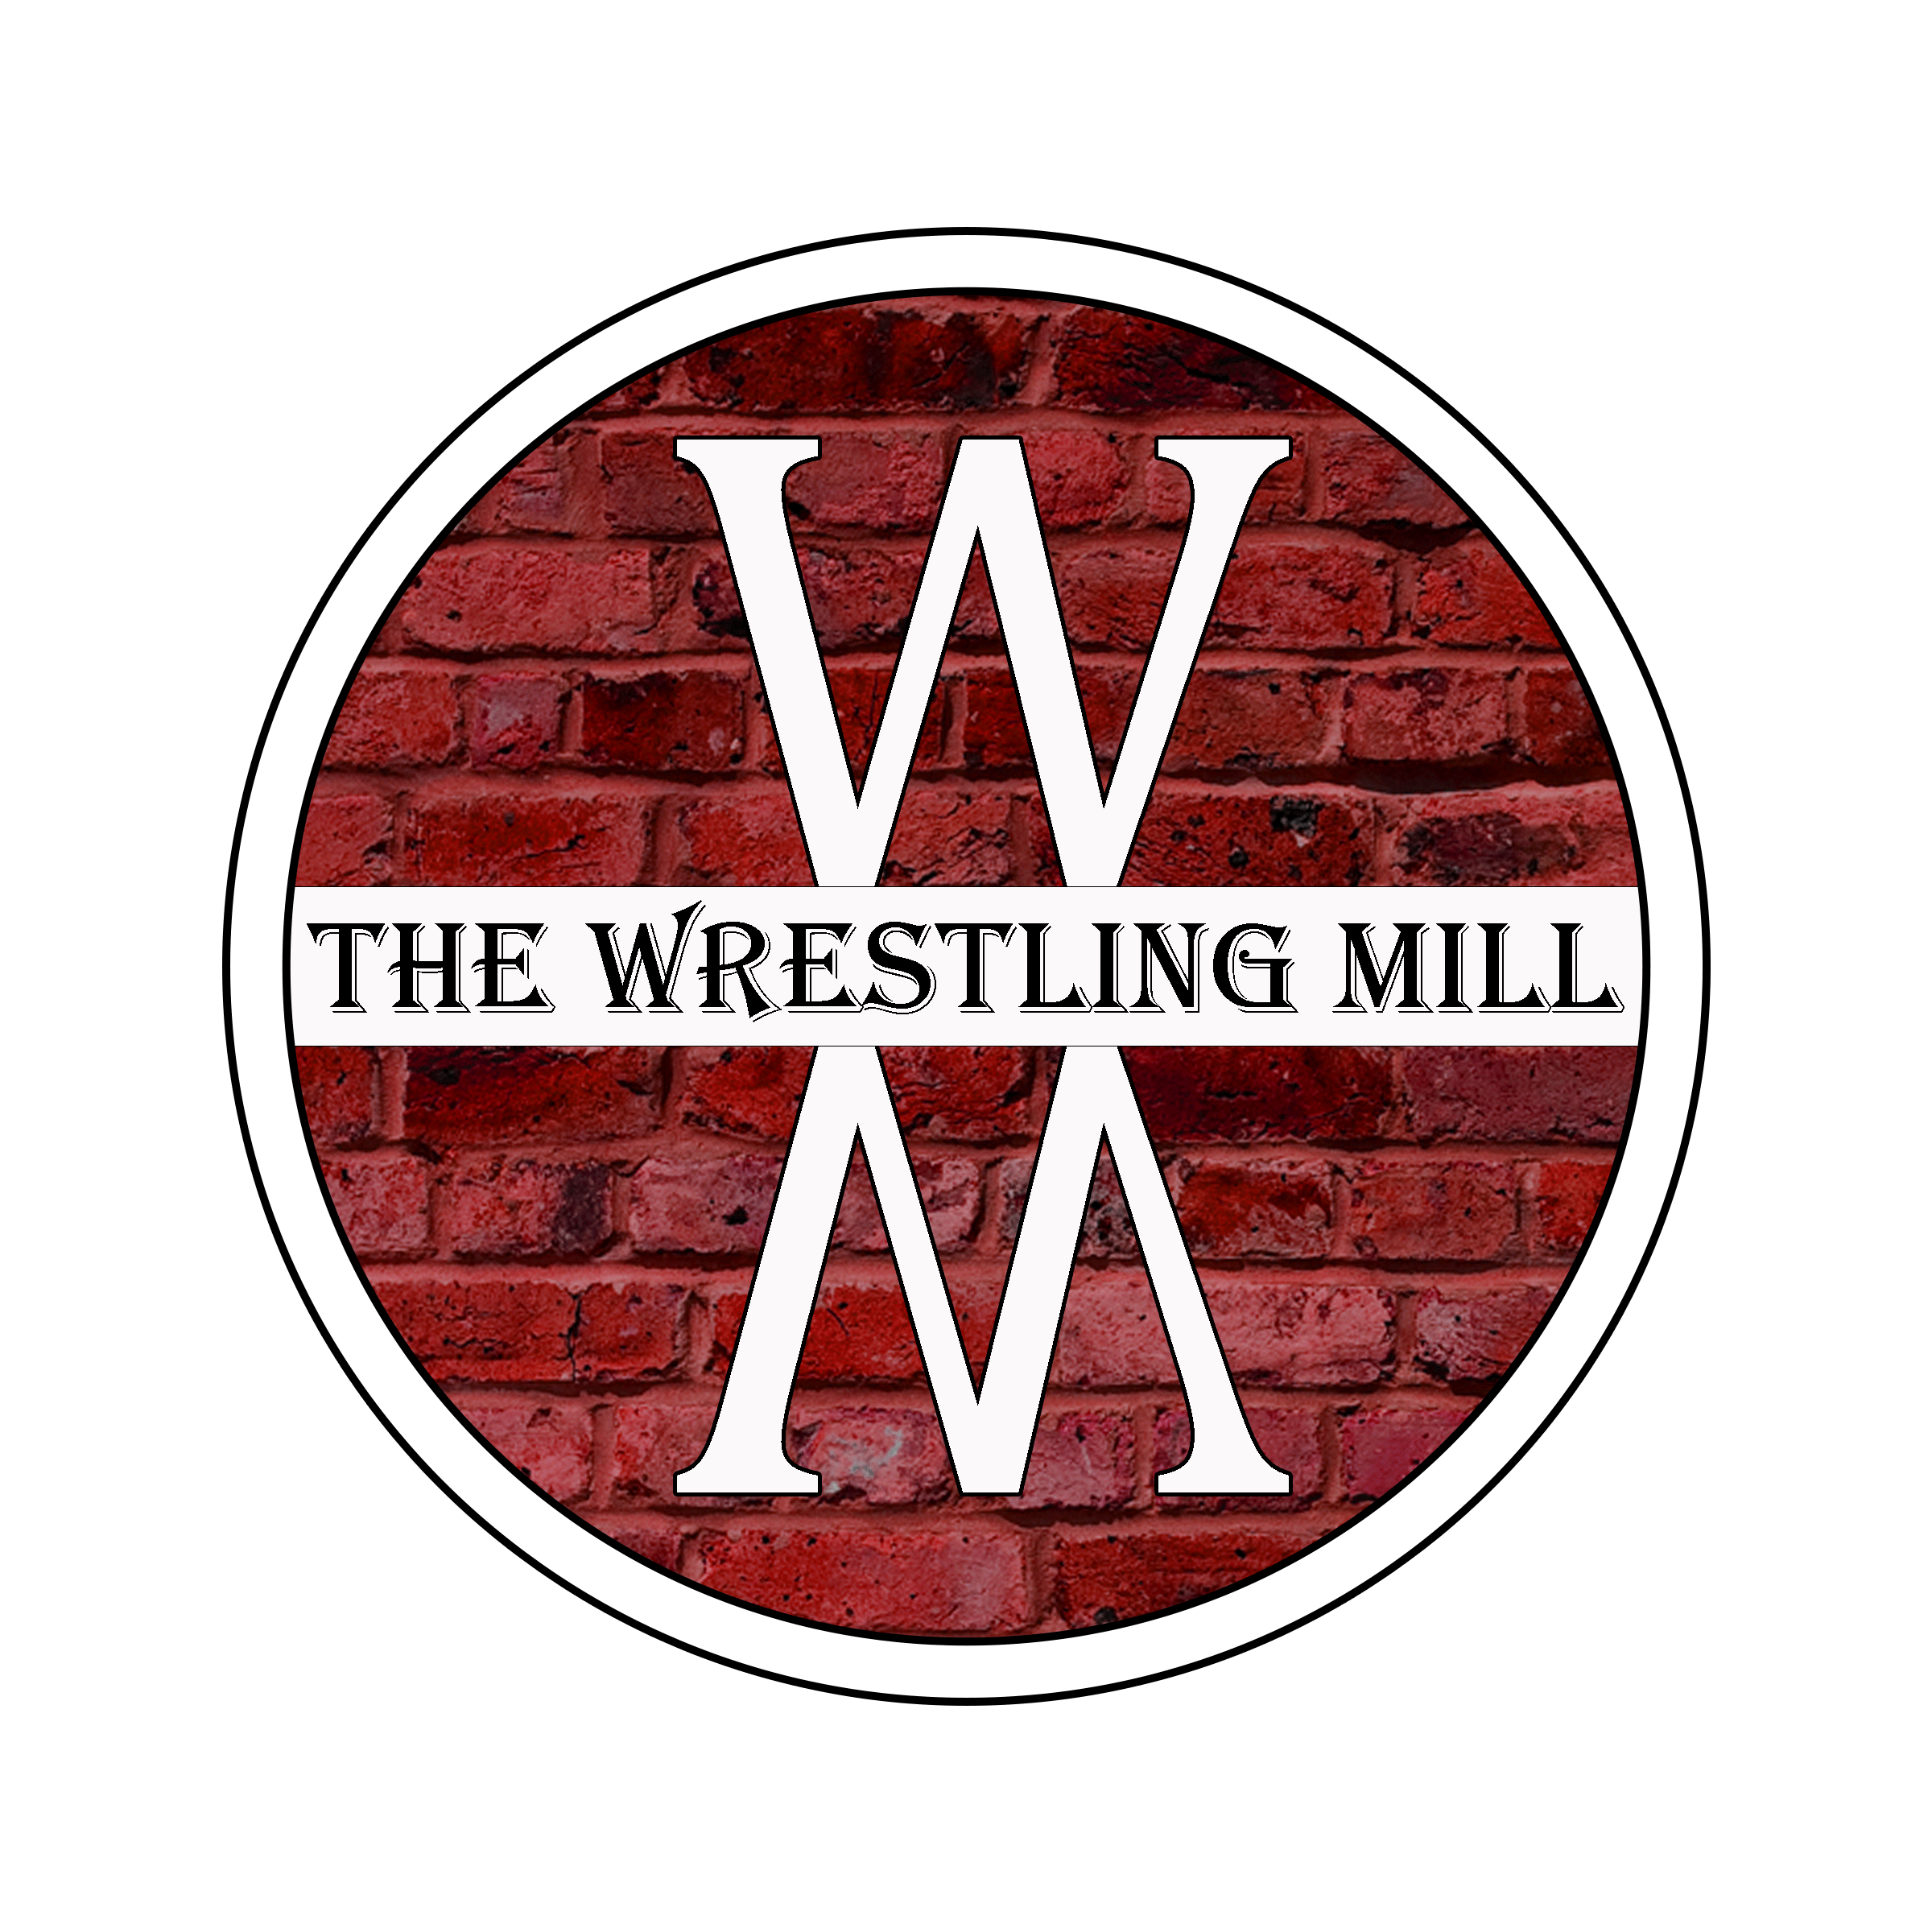 The Wrestling Mill